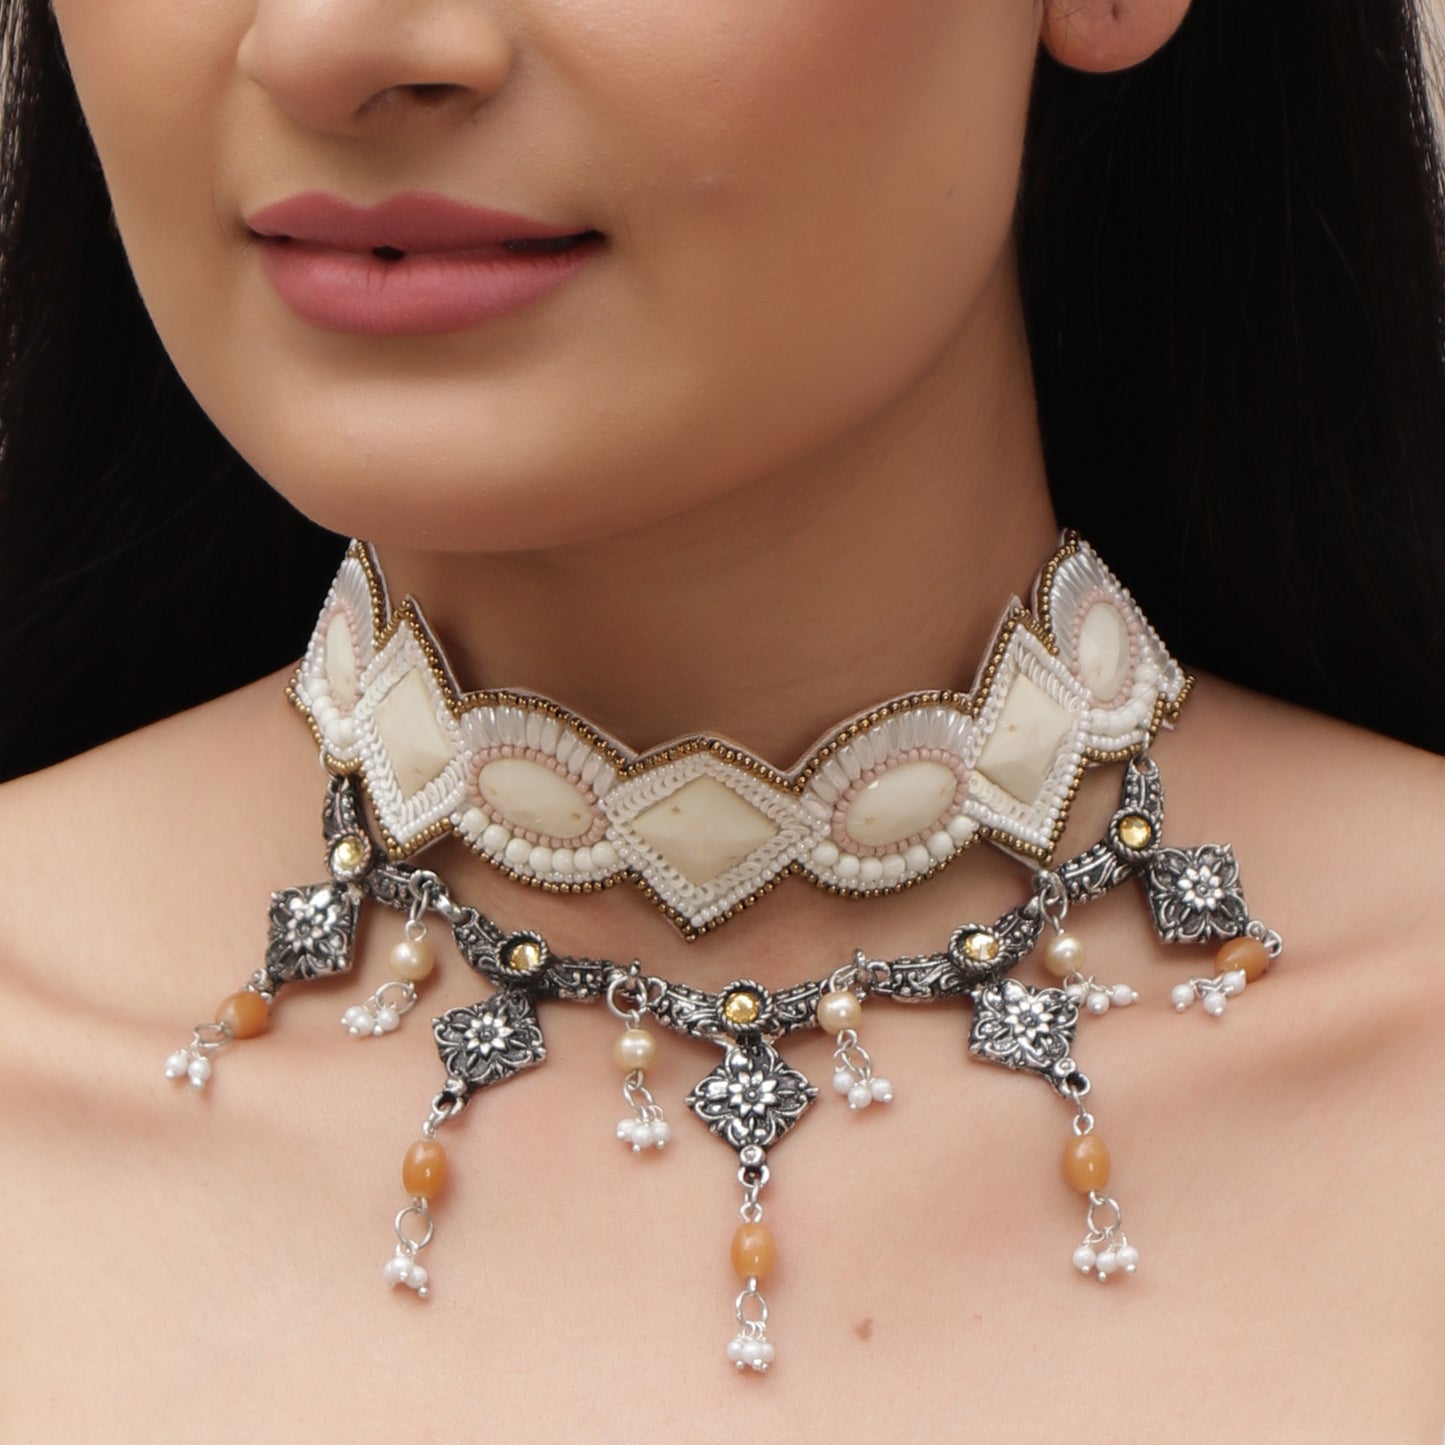 The Quirky Coral White Beaded Choker